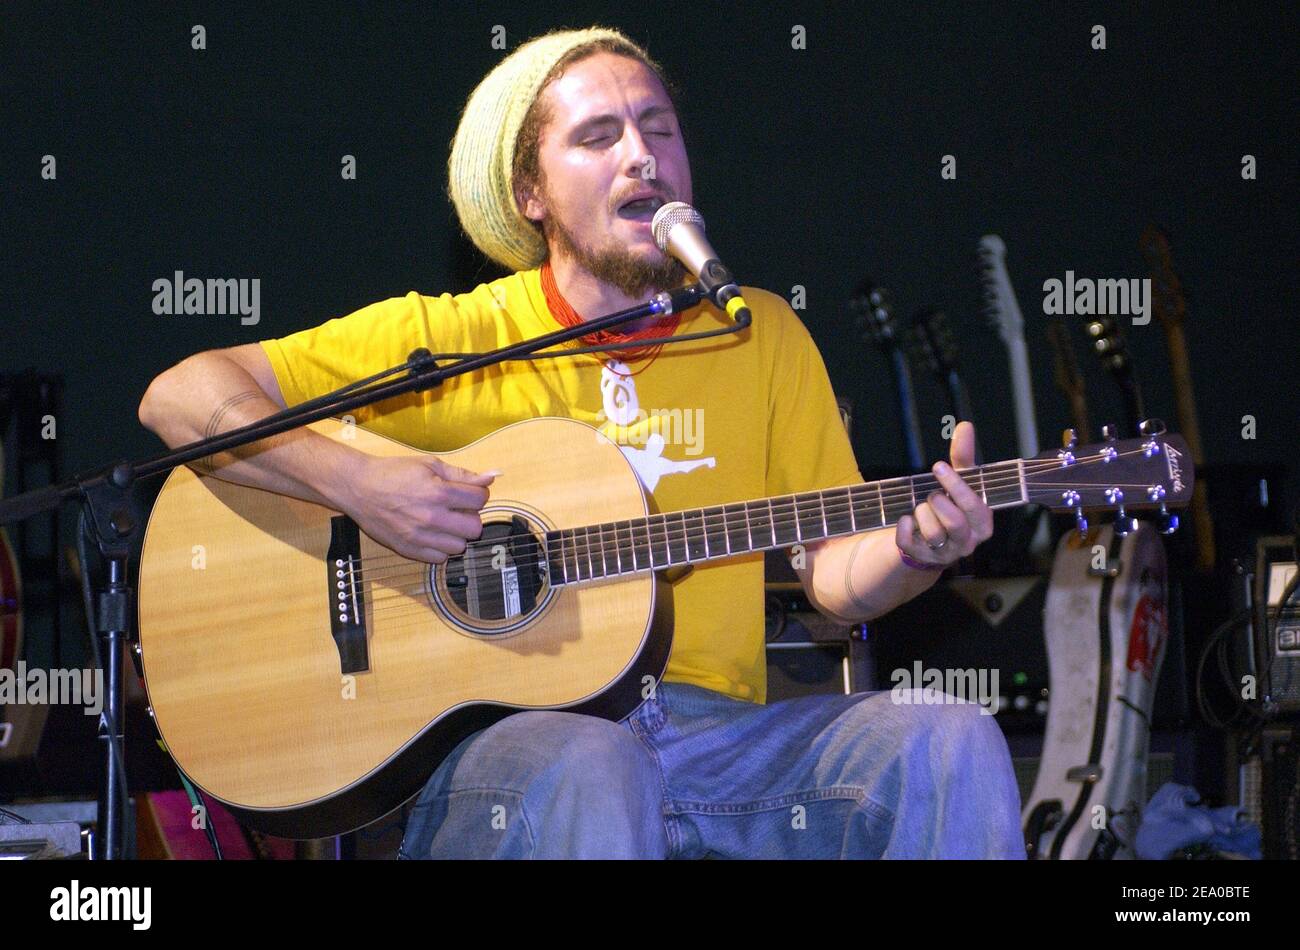 'John Butler of The John Butler Trio performs as part of South By Southwest ''SxSw'' at Stubbs in Austin Texas on March 19, 2005. (Pictured: John Butler Trio, John Butler) Photo by: Tim Mosenfelder/ABACA' Stock Photo